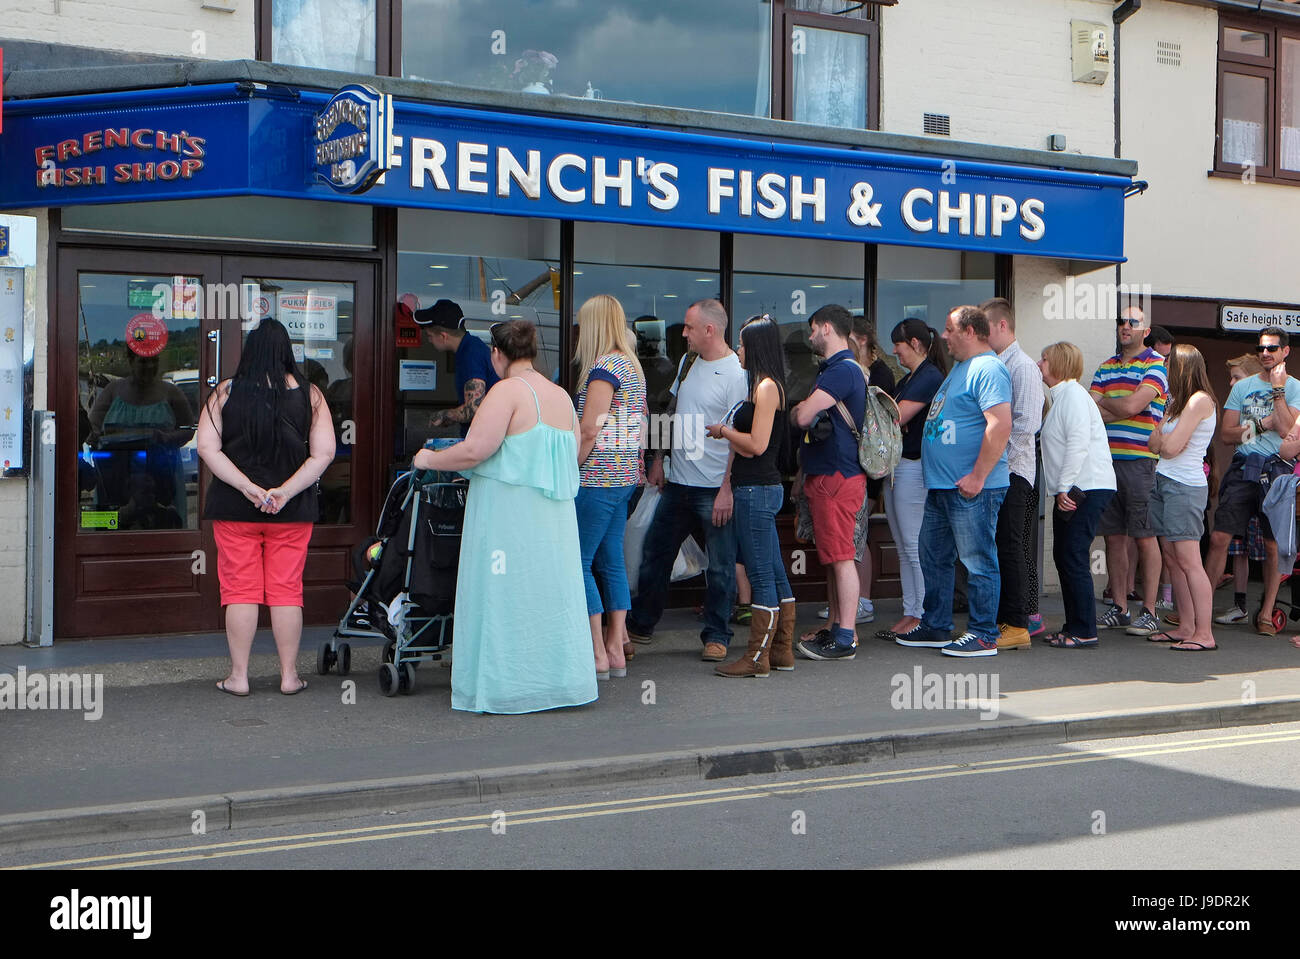 people queuing outside french's fish & chip shop, wells-next-the-sea, north norfolk, england Stock Photo